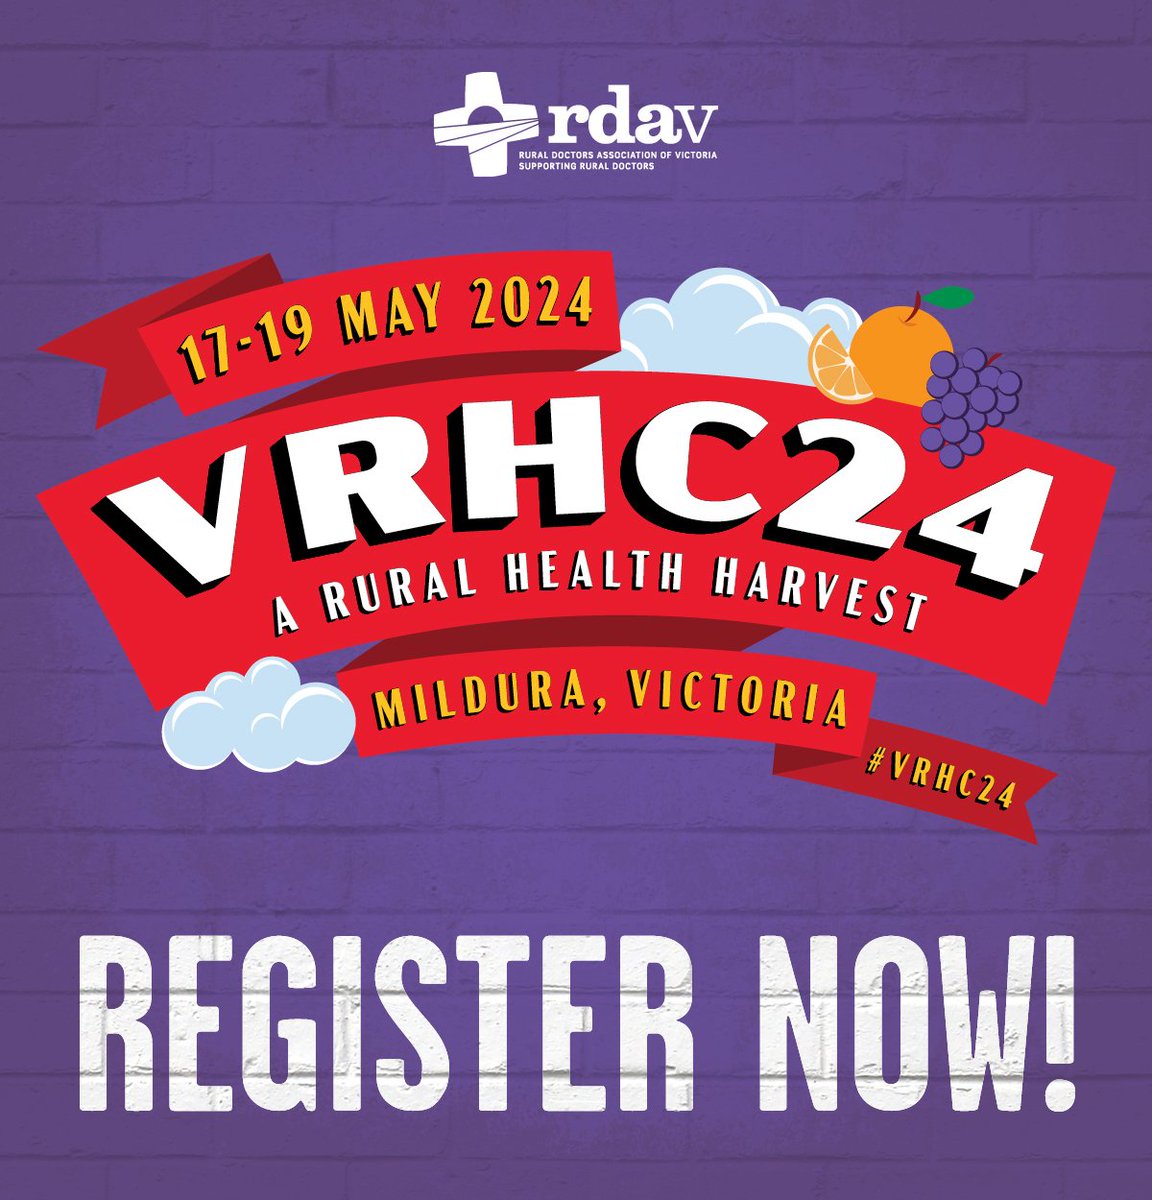 Coming to Mildura for the Victorian Rural Health Conference 2024 17-19 May 2024? Don't forget to contact @RWAVictoria about your eligibility for financial support. Info on #VRHC24 website bit.ly/476kxt4 GP & RG Registrars and Fellows included.